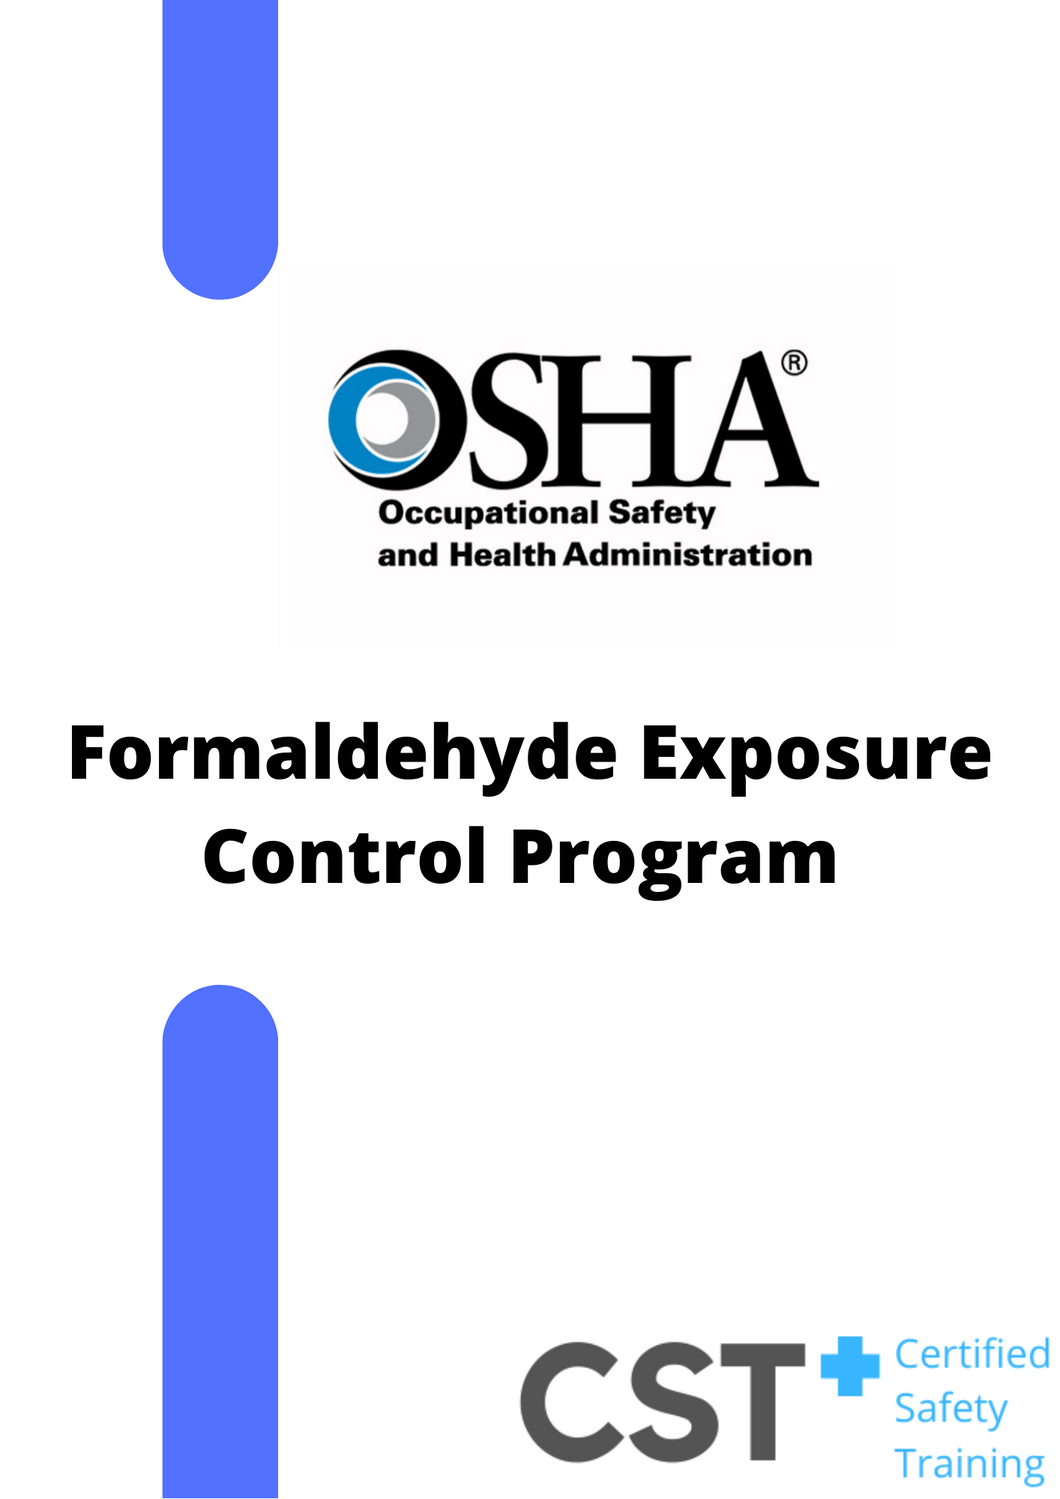 Formaldehyde Exposure Control Program: Includes Testing and Analysis